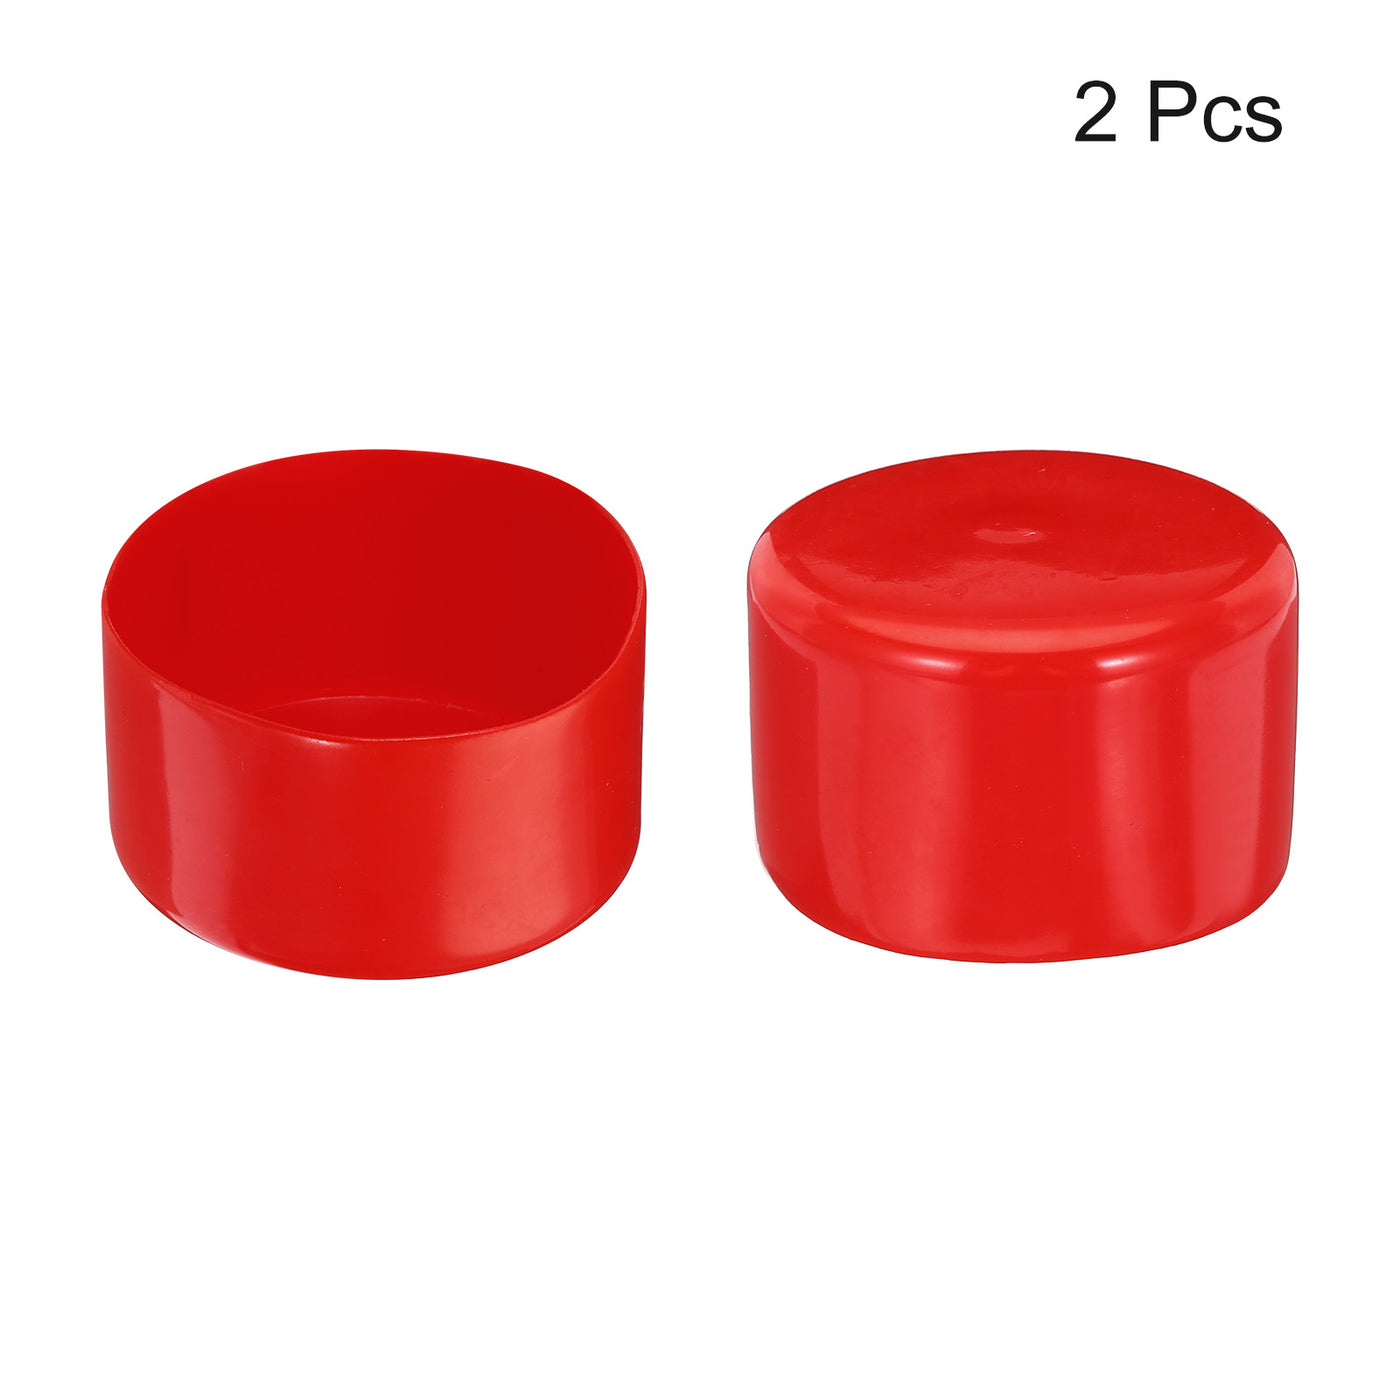 uxcell Uxcell 2pcs Rubber End Caps 90mm ID Vinyl Round Tube Bolt Cap Cover Screw Thread Protectors Red